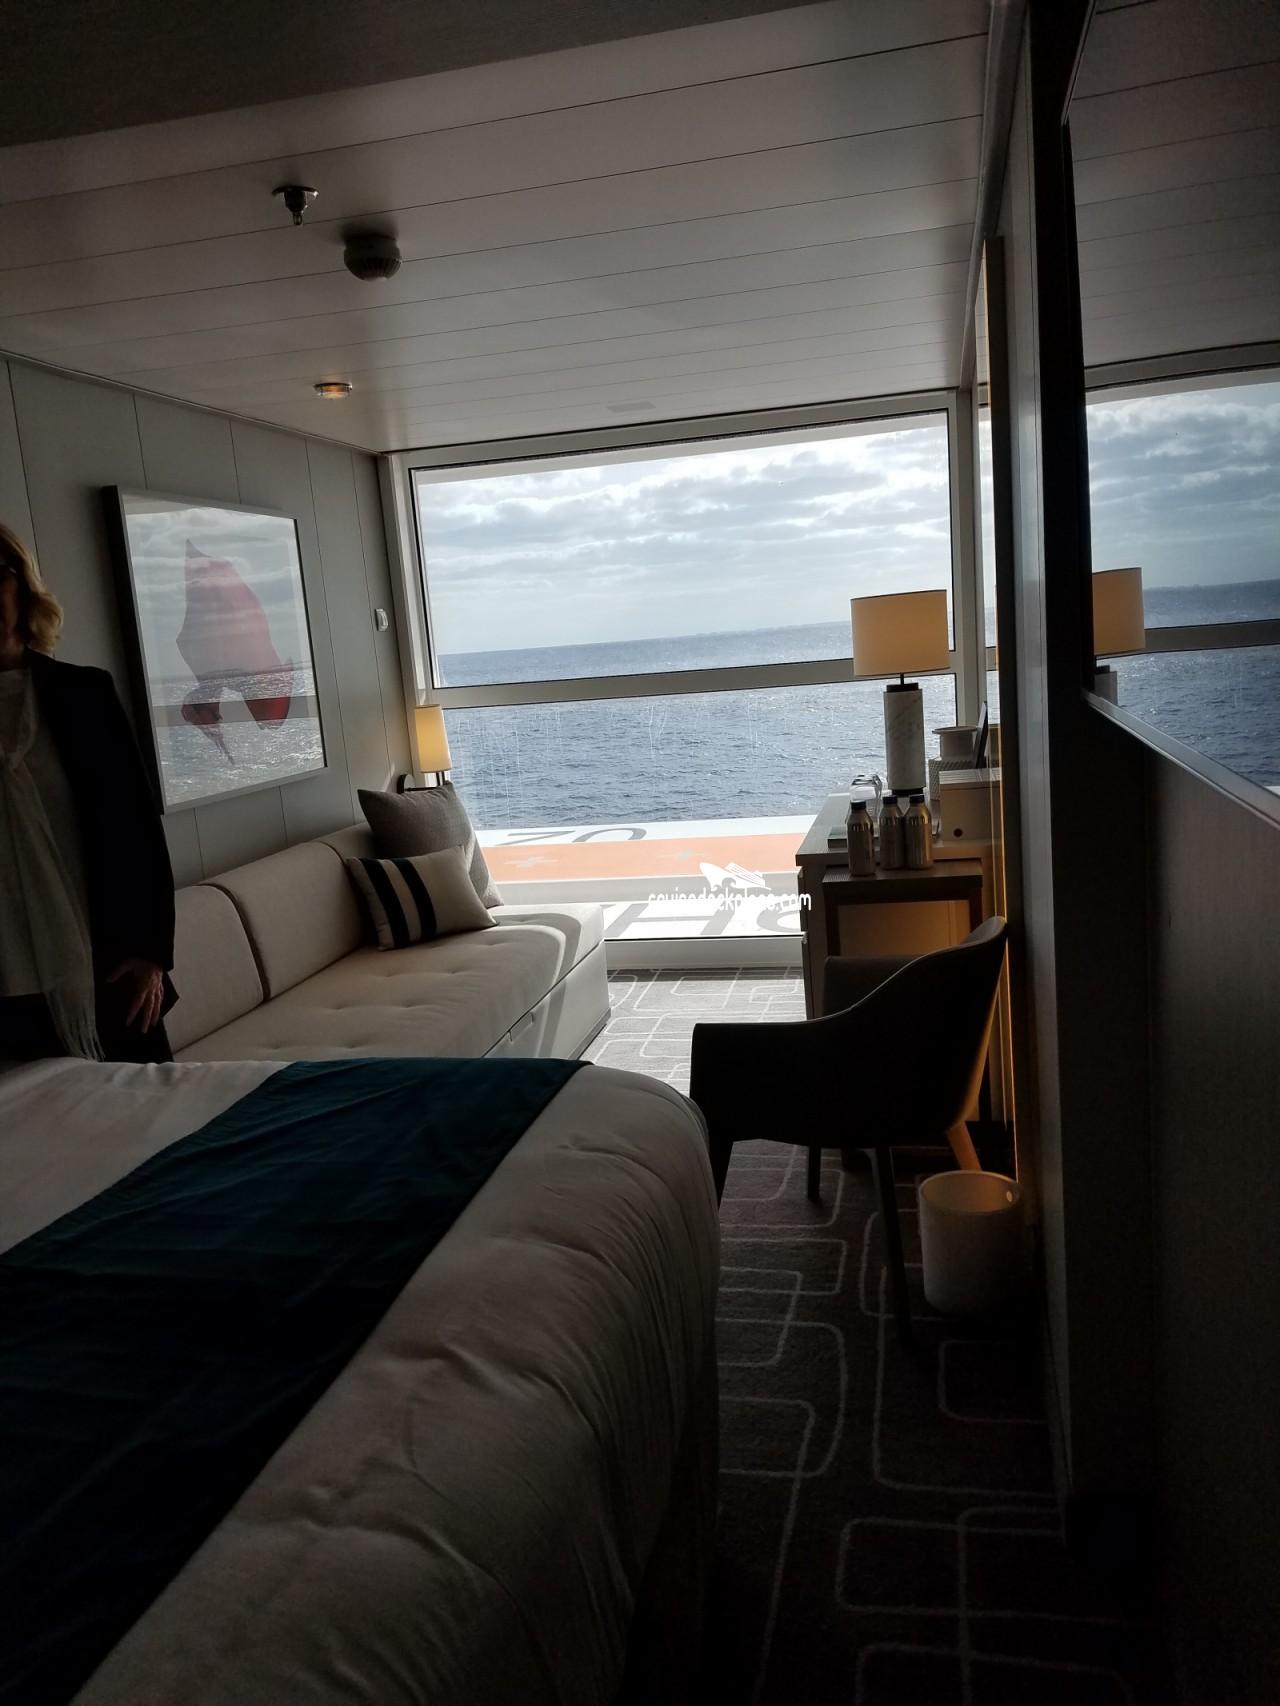 Celebrity Edge Panoramic Ocean View Stateroom Cabins